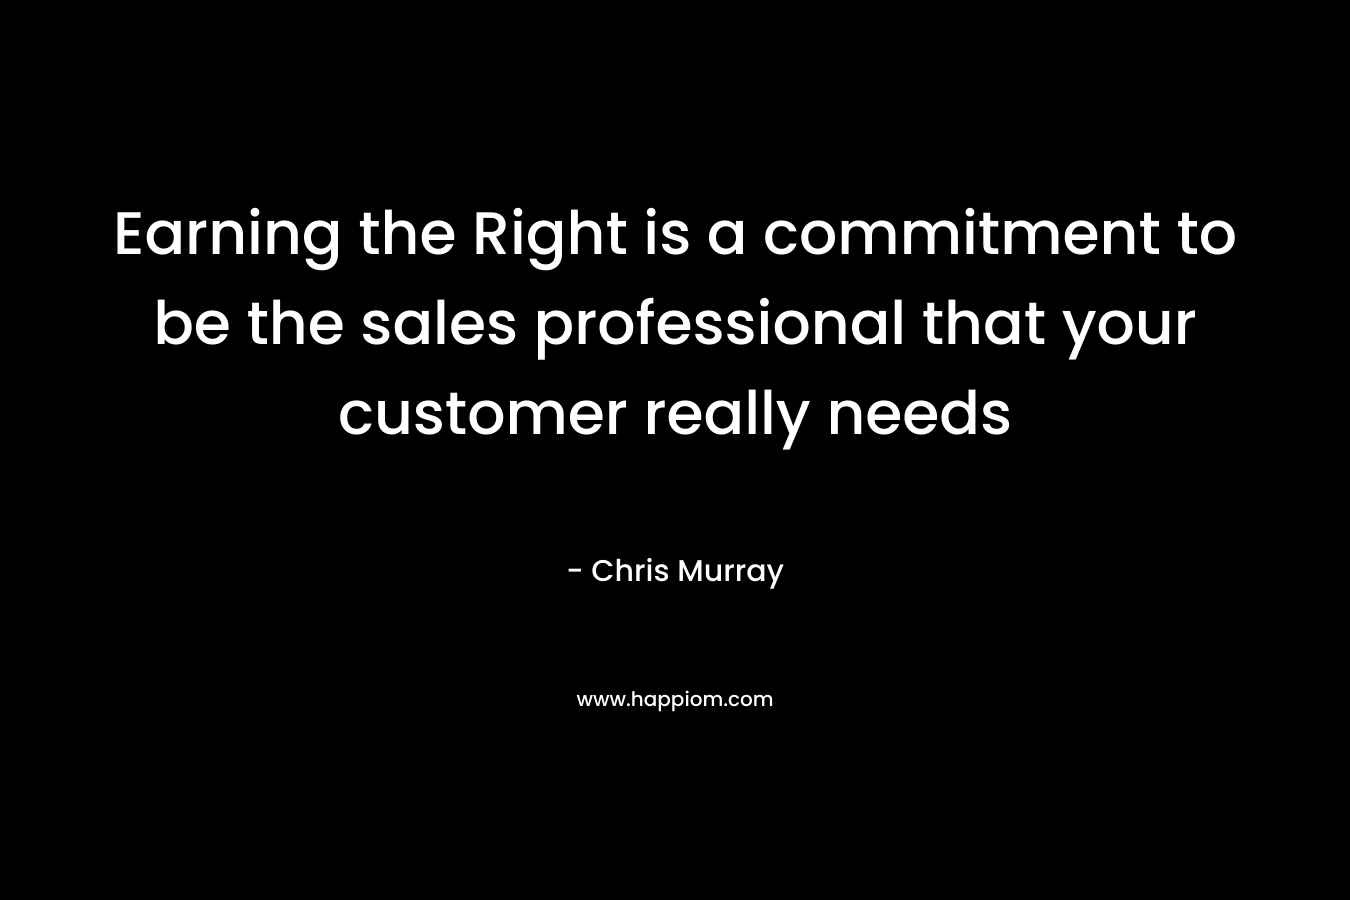 Earning the Right is a commitment to be the sales professional that your customer really needs